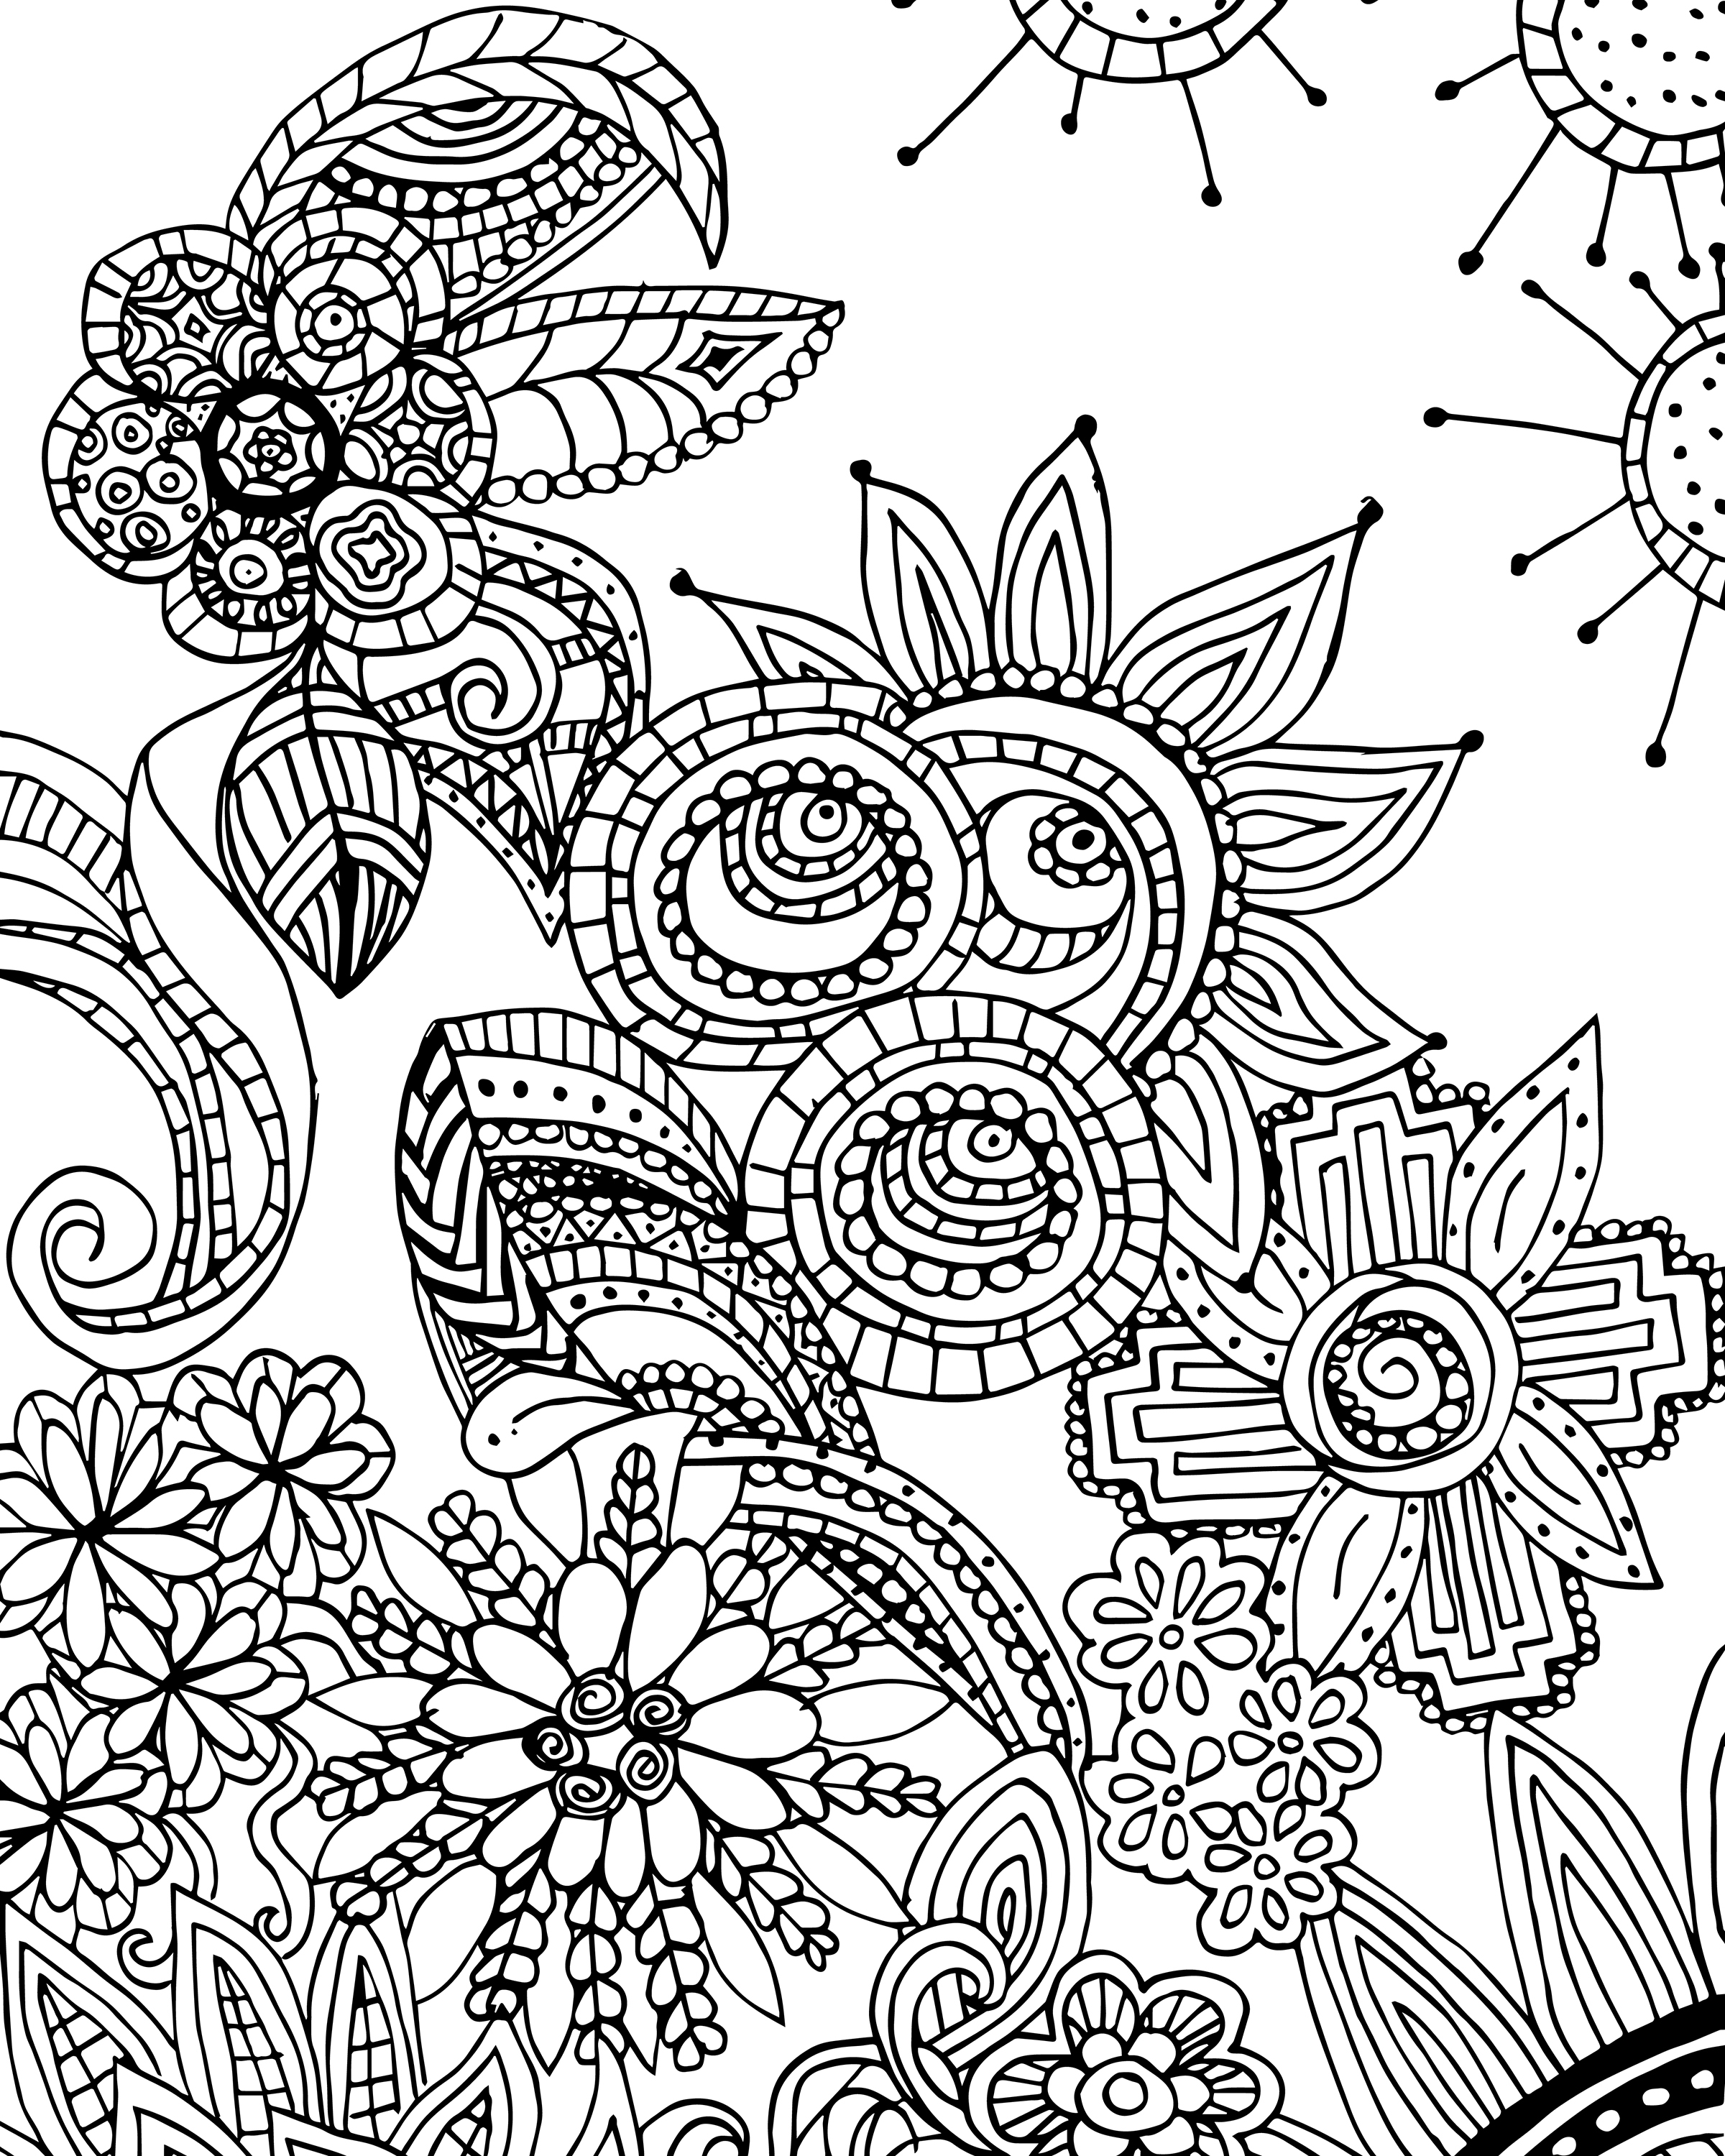 zendoodle coloring pages at getdrawings free download - 6 best images ...